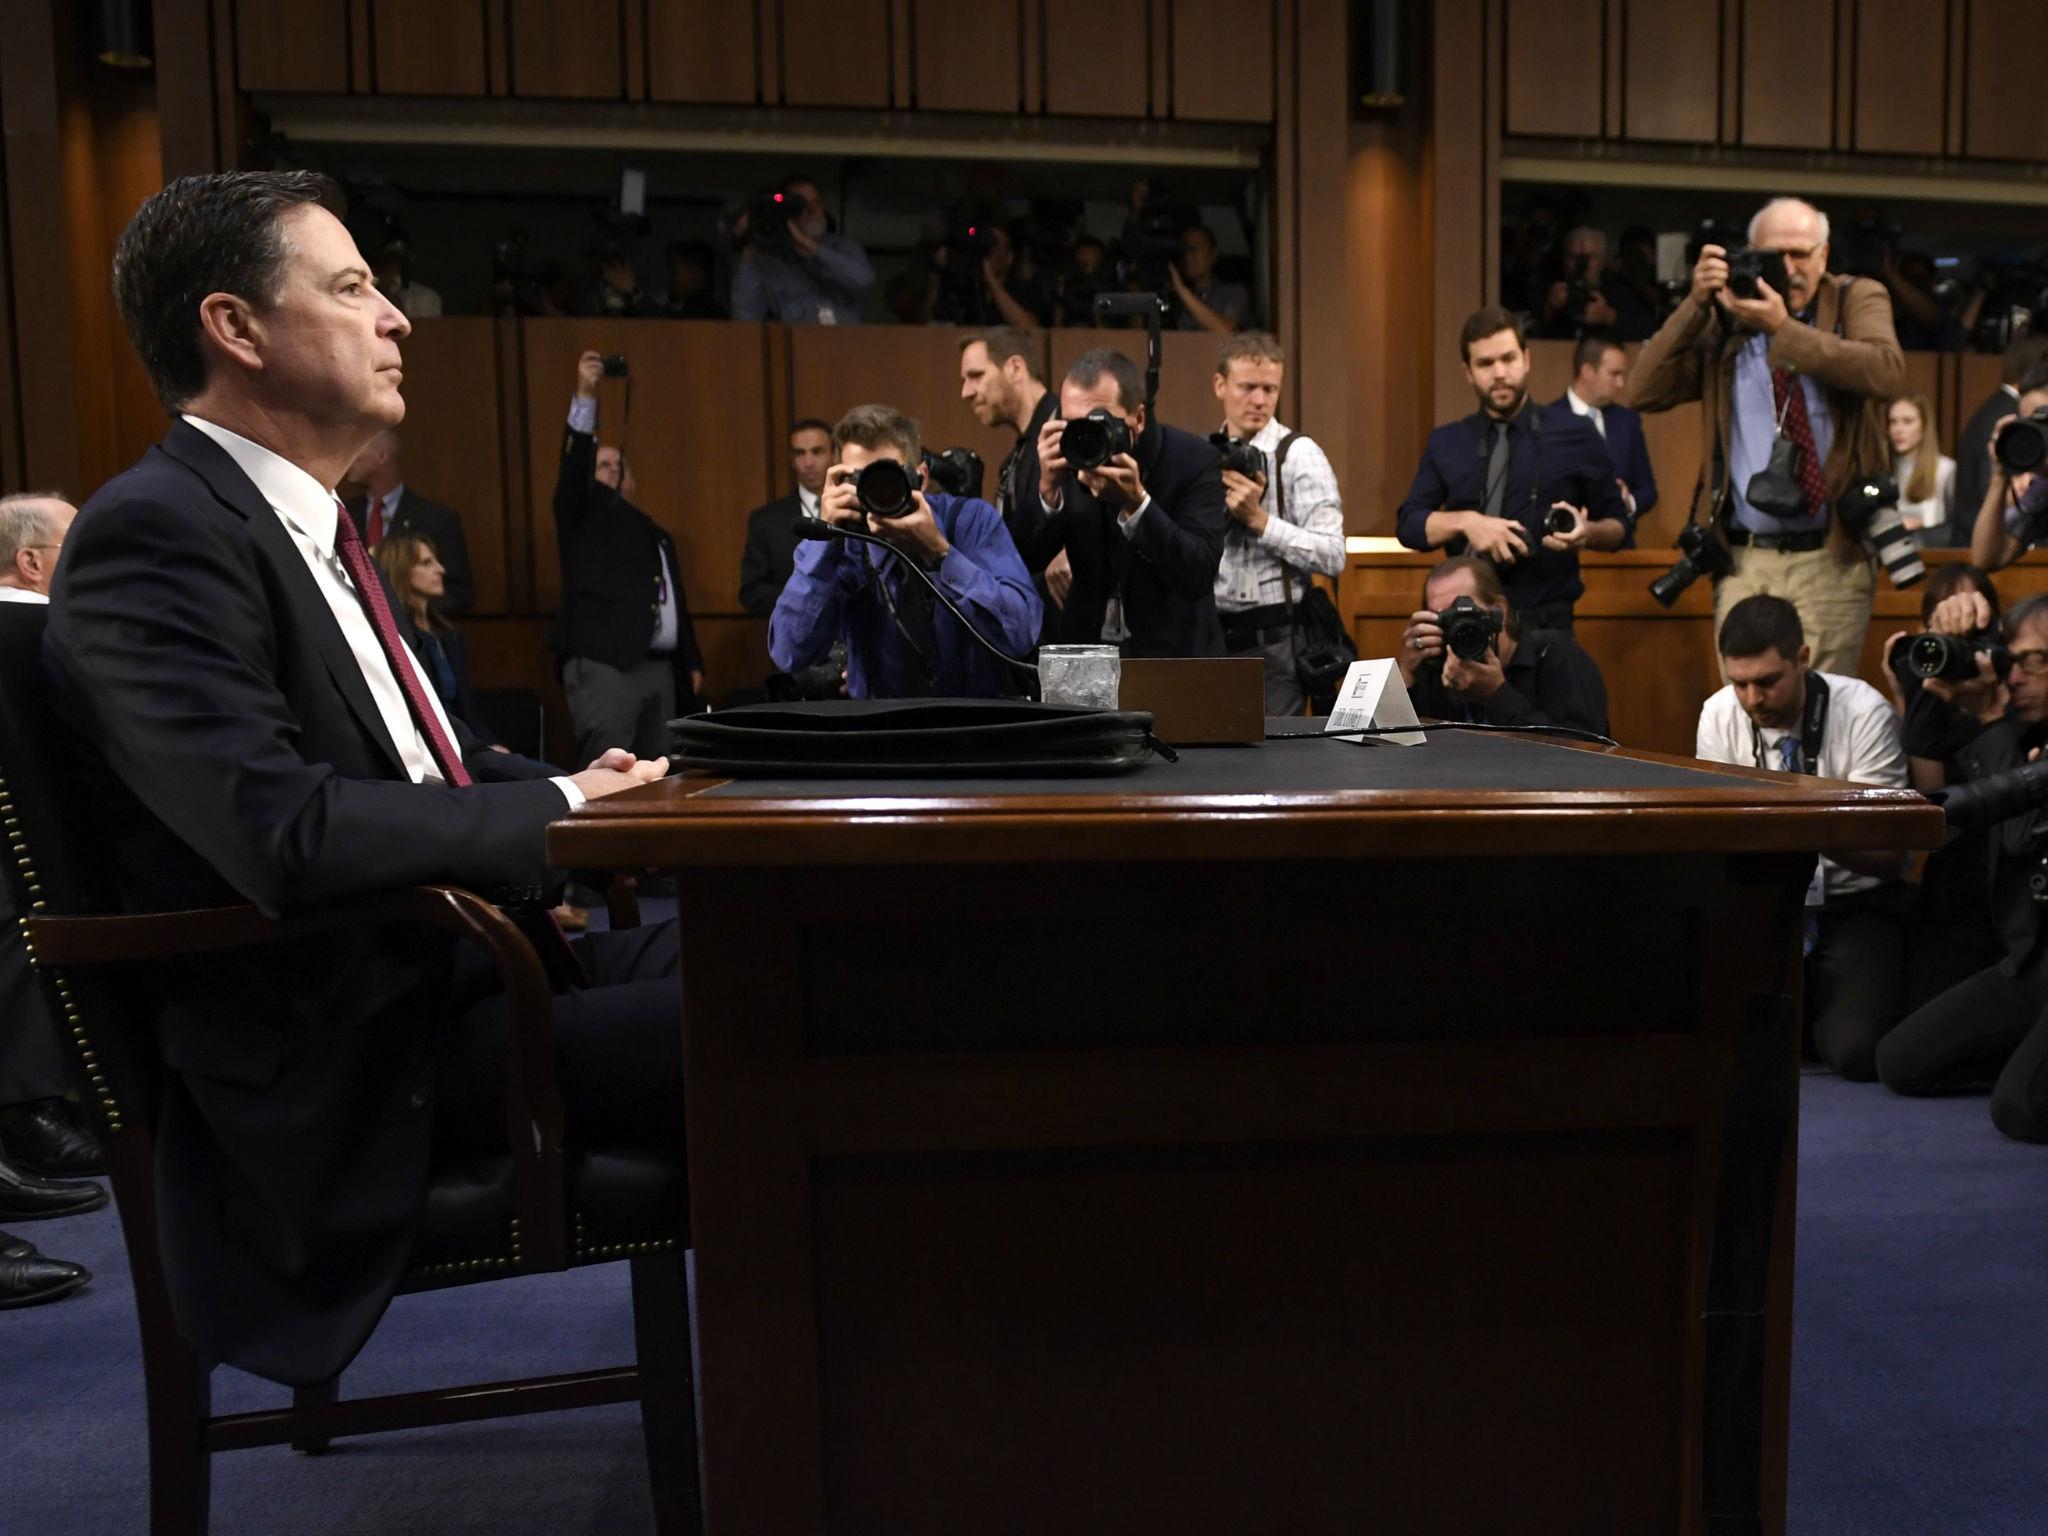 James Comey said whether Donald Trump obstructed justice or not should be left up to special prosecutor Robert Mueller